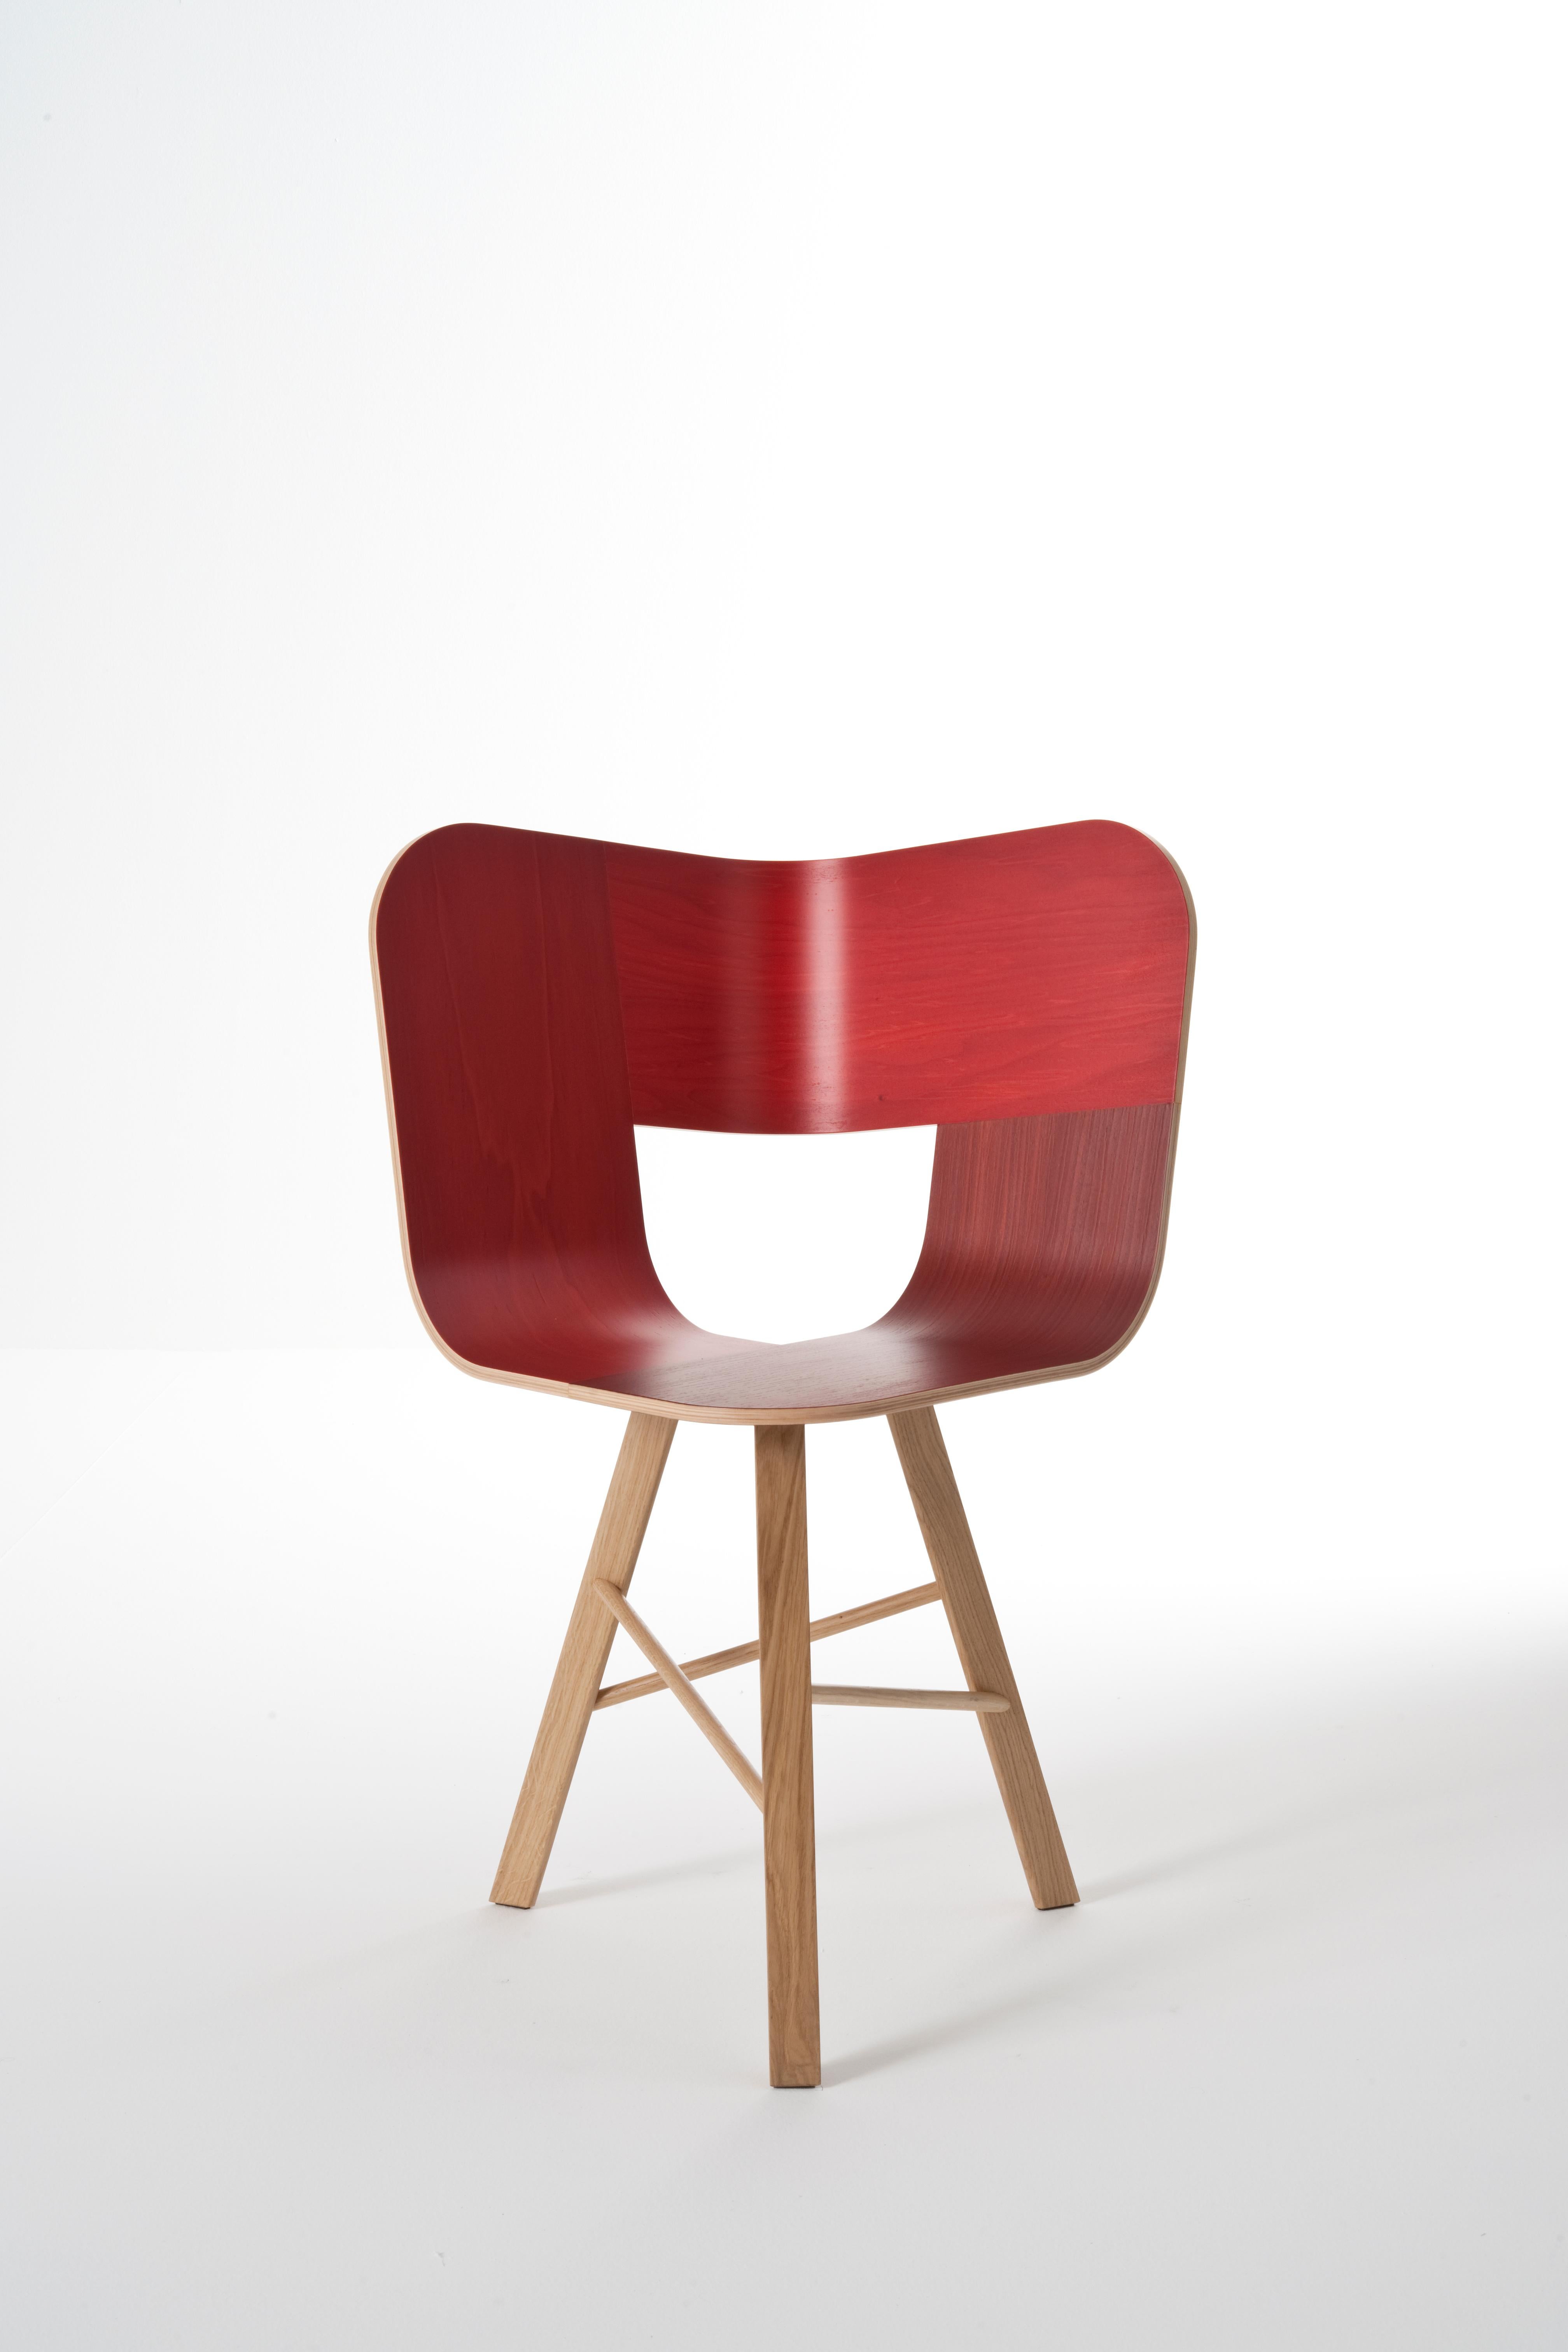 Set of 2, tria wood 3 legs chair, red by Colé Italia with Lorenz & Kaz
Dimensions: H 82.5, D 52, W 61 cm
Materials: Plywood chair; 3 legs solid oak base

Also Available: Tria; 4 Legs, with Cushion, Black, Gold, Simple, Stool, Upholstered.

Our